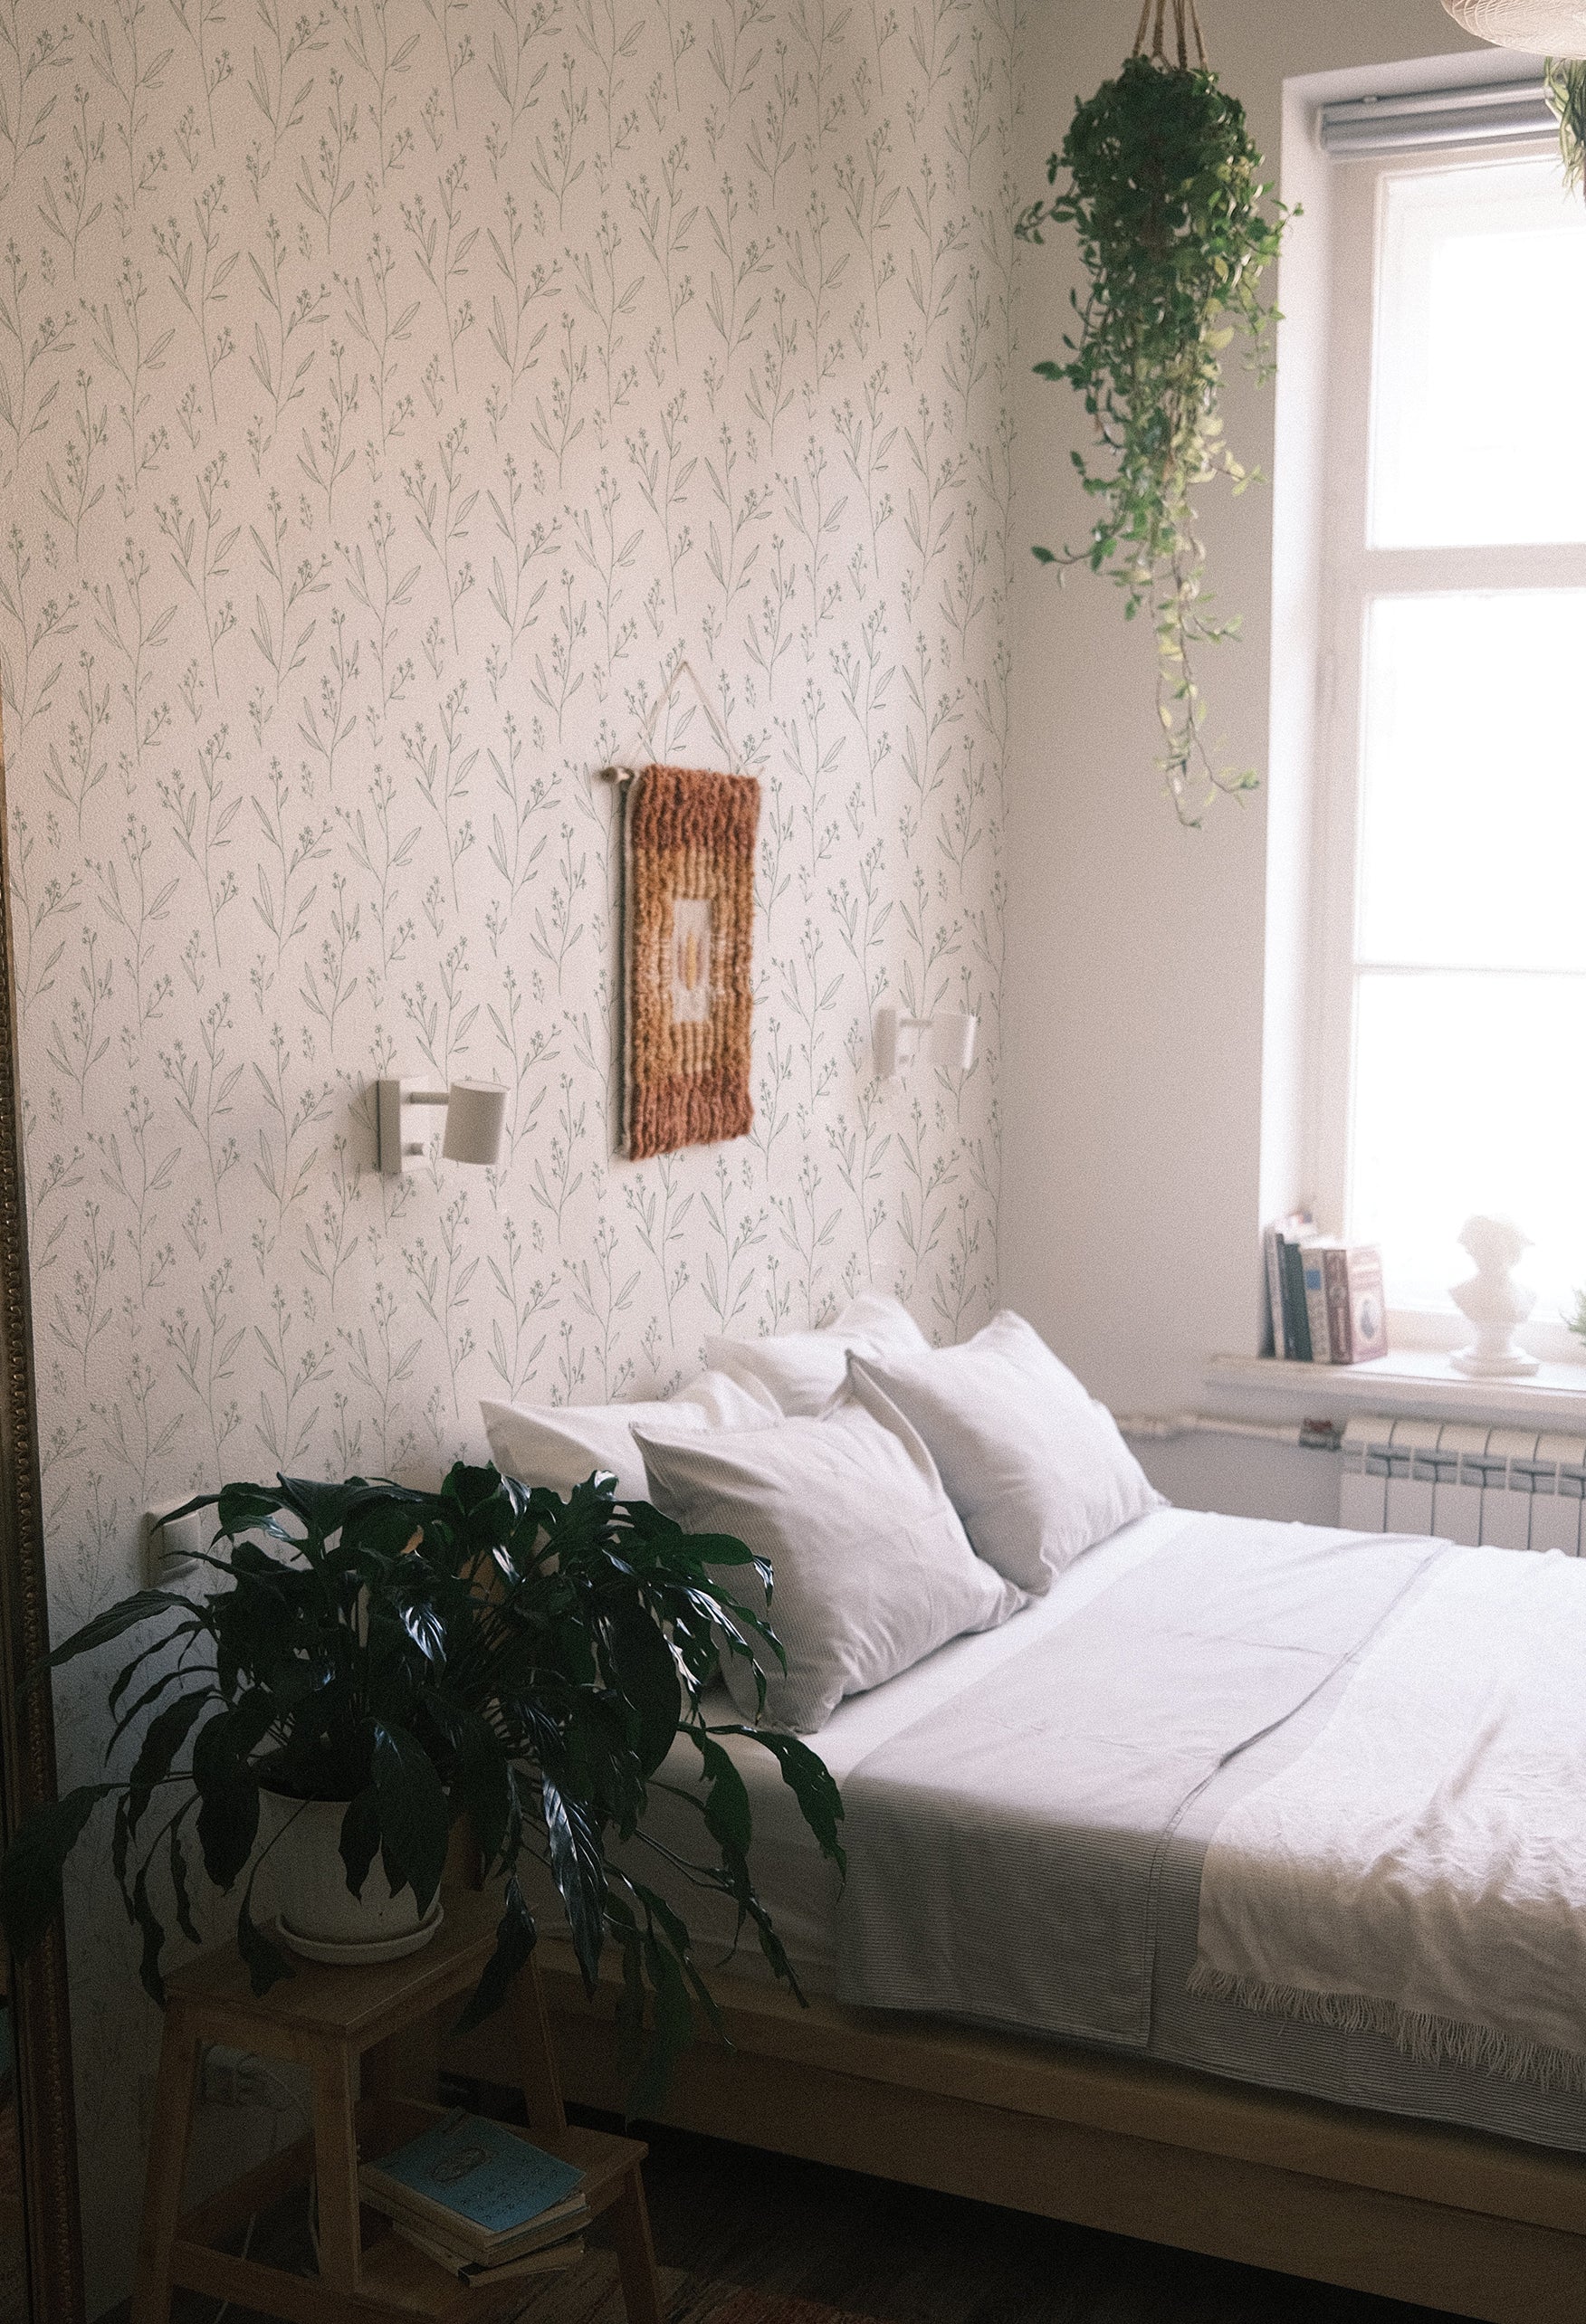 A light-filled bedroom corner with a minimalist aesthetic, featuring the Dainty Minimal Floral - Light Sage wallpaper. The wall exhibits a subtle and elegant pattern of light sage green floral illustrations against a clean, off-white background. A large, healthy potted plant sits by the white metal bed, which is neatly made with white linens, enhancing the room’s fresh and airy feel. A woven tapestry hangs above the bed, adding a touch of warmth and texture to the space.